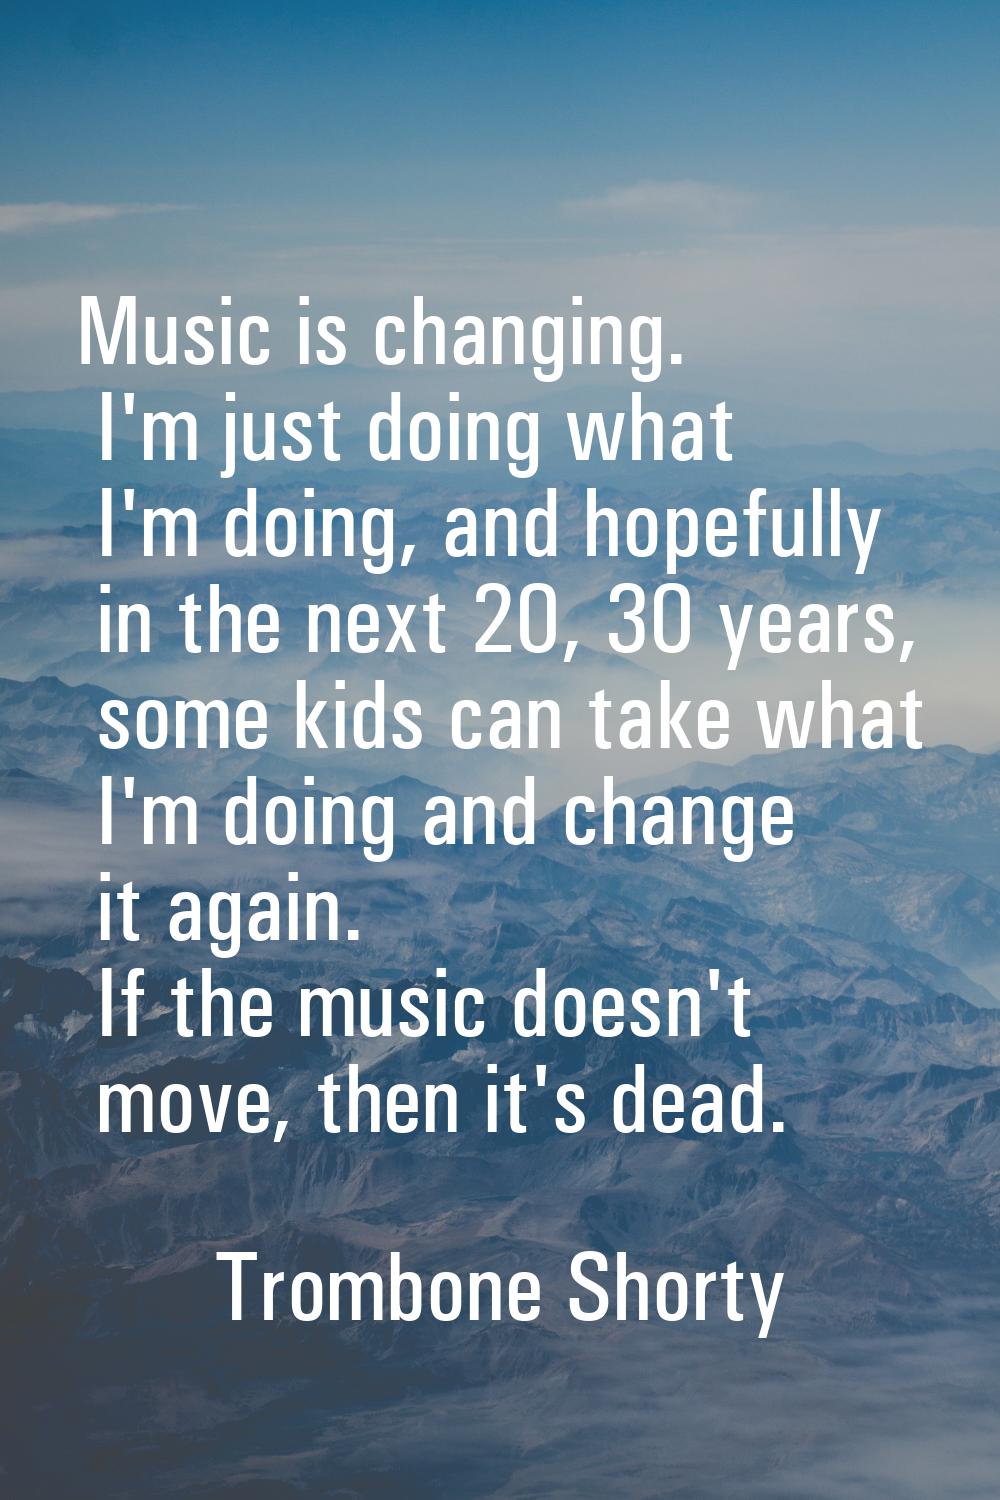 Music is changing. I'm just doing what I'm doing, and hopefully in the next 20, 30 years, some kids